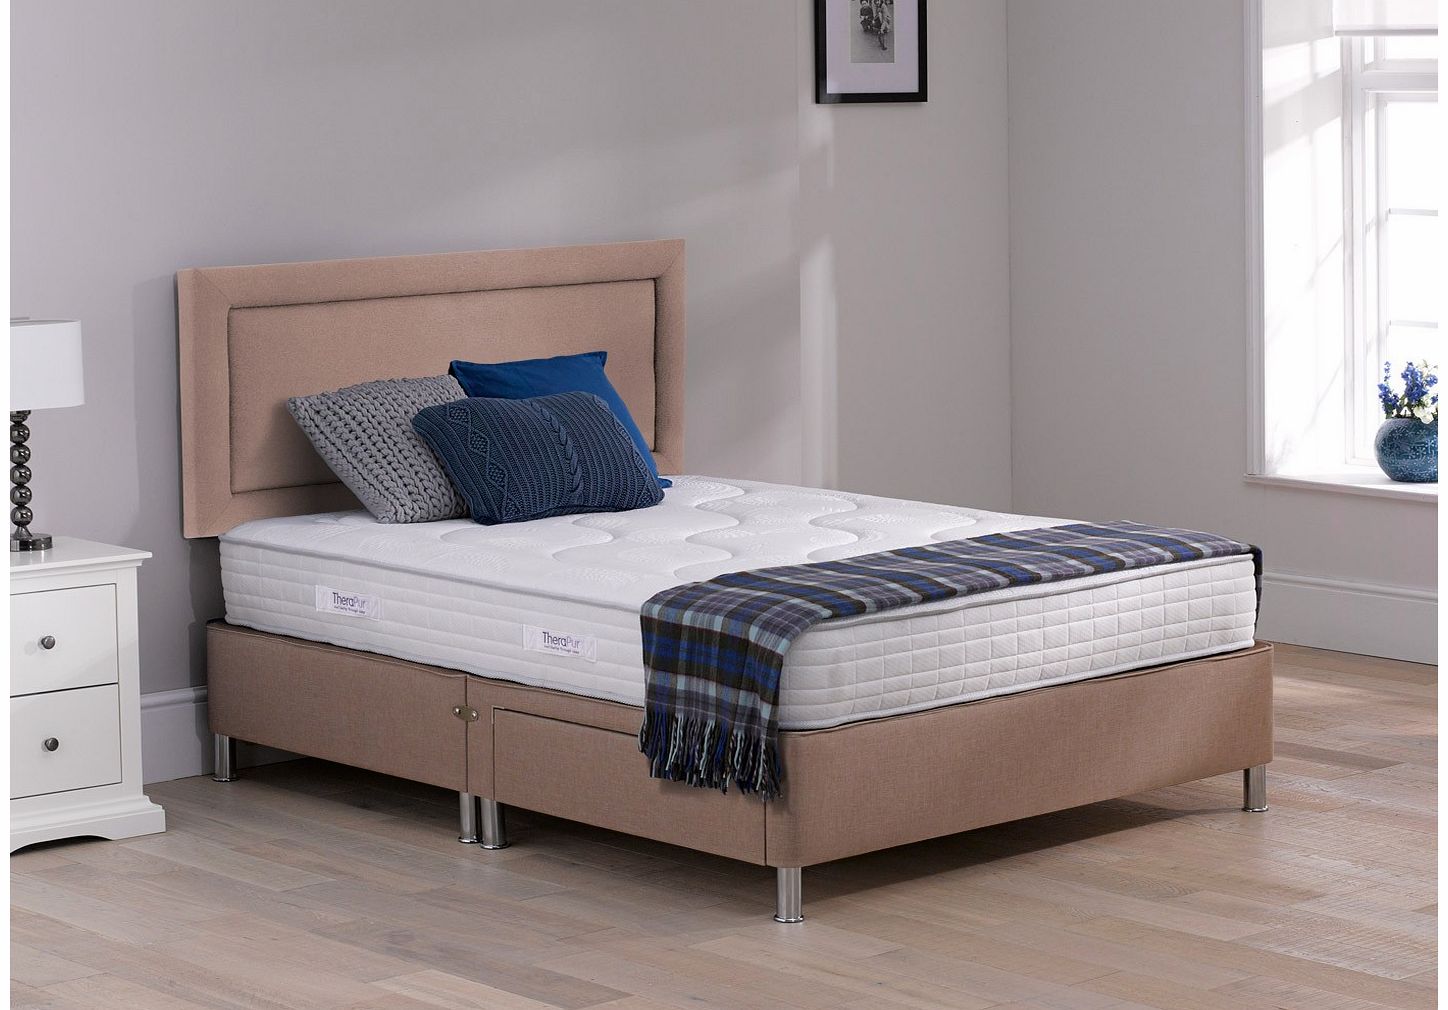 4`6 Double Therapur Emotion 24 Divan Bed With Legs - Medium